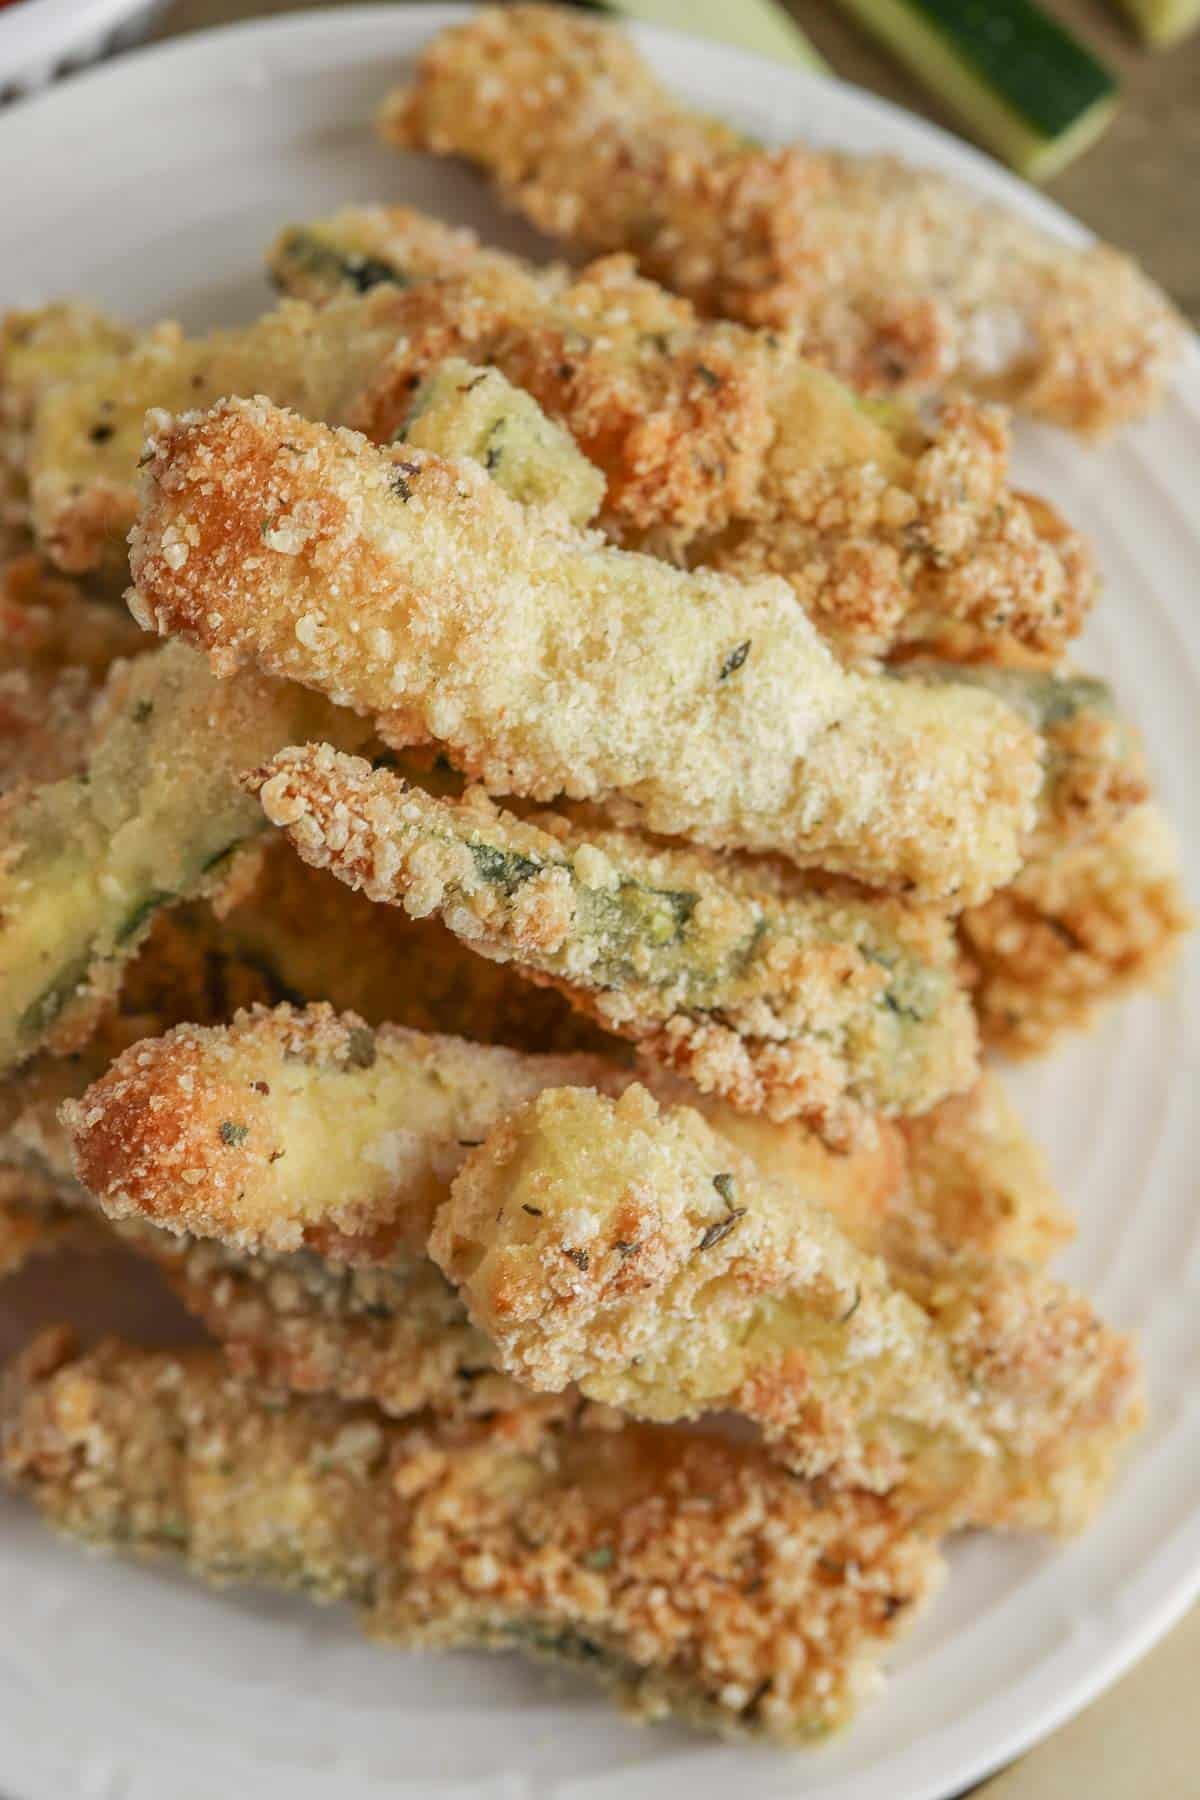 Pile of zucchini fries on a small white plate.